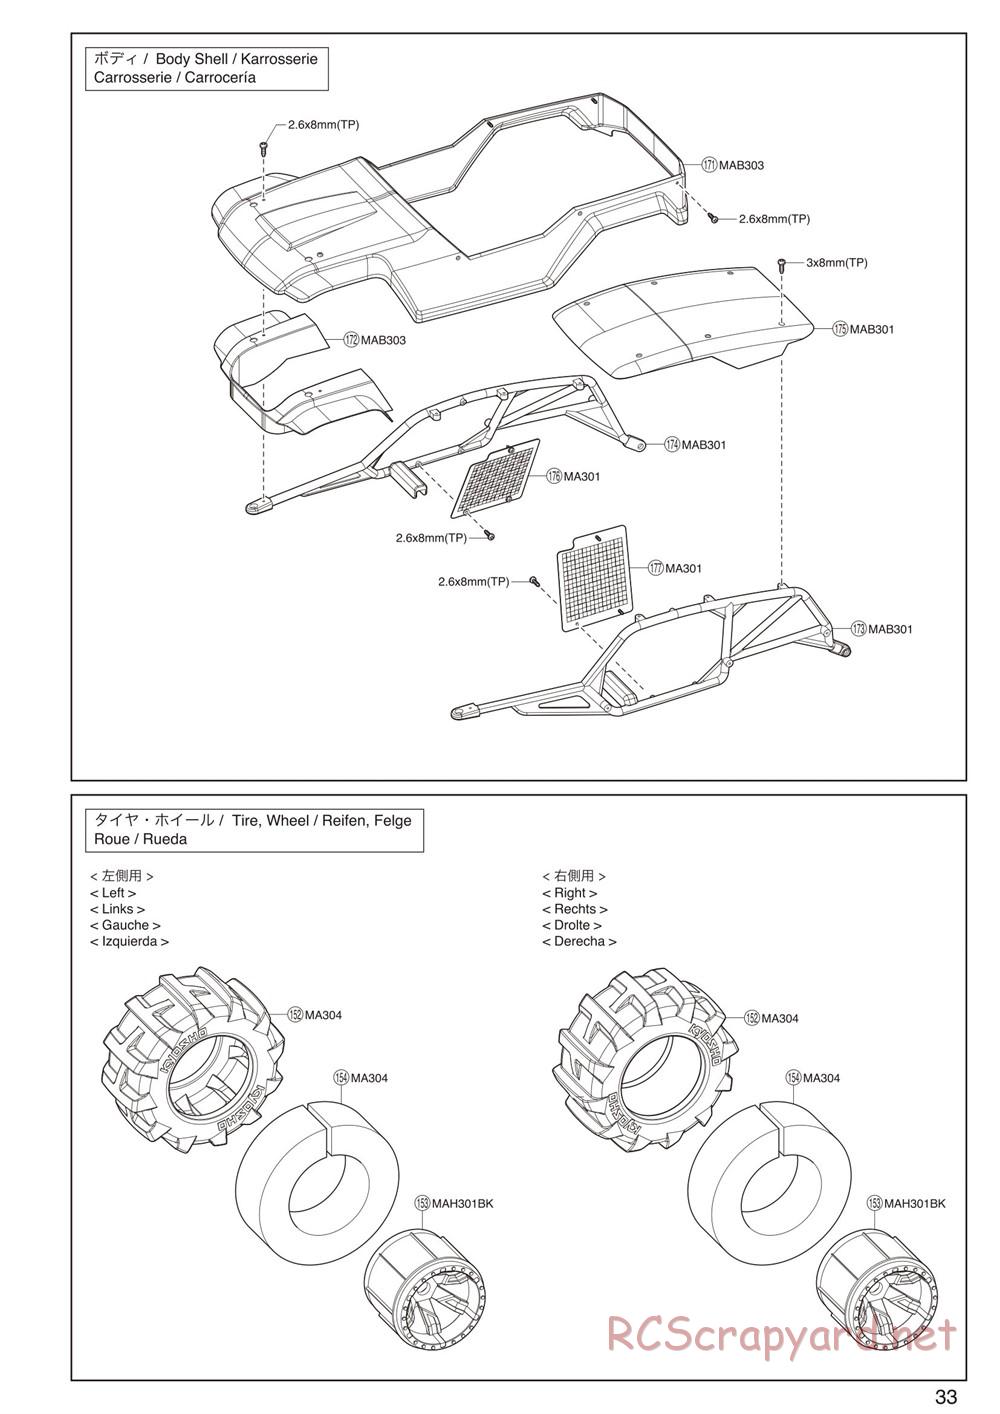 Kyosho - FO-XX VE - Manual - Page 32